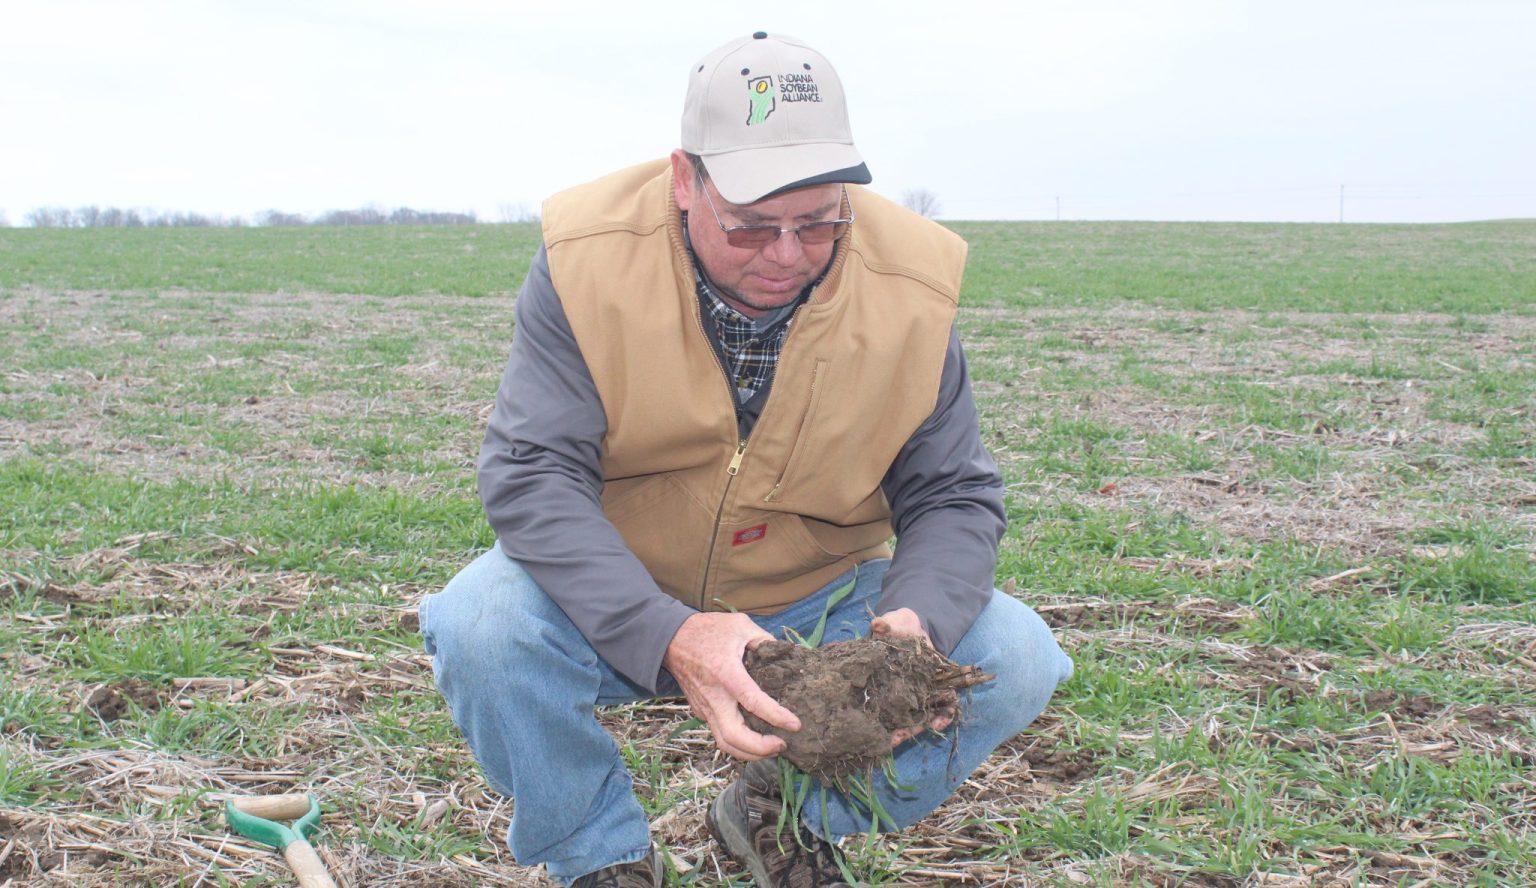 Farmers Deliver Sustainability & Conservation - Indiana Corn and Soy